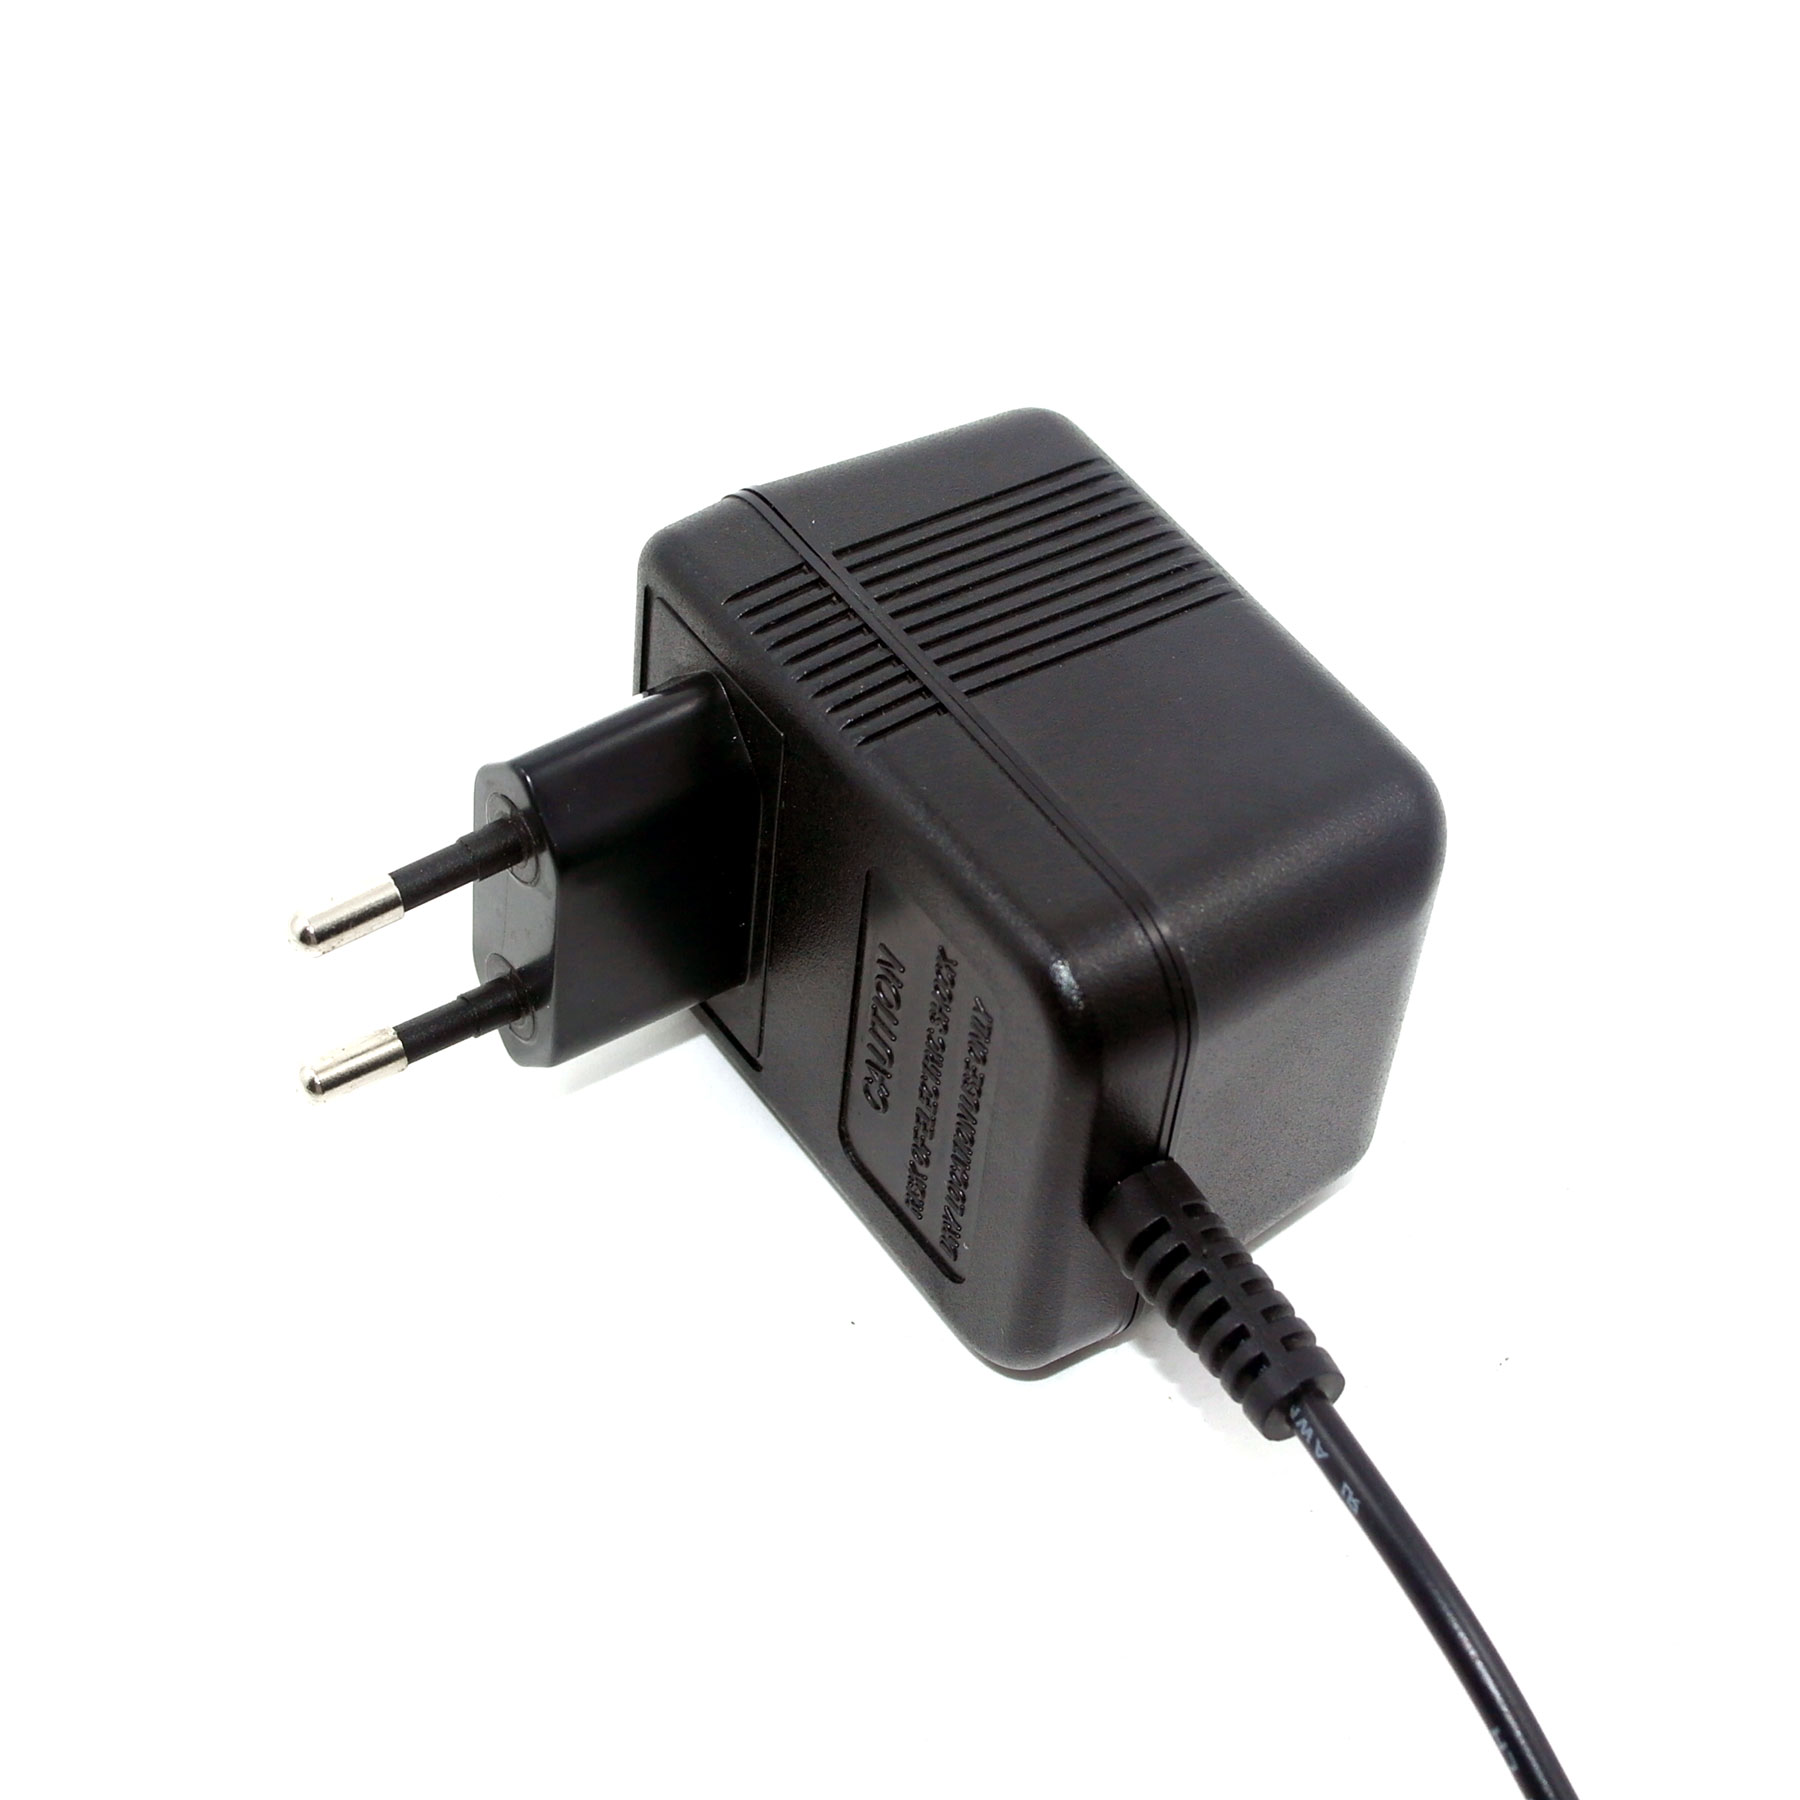 KRE-2400350L,Linear power adapter, AC adapters, 24V 0.35A 8.4W CE ROHS E141